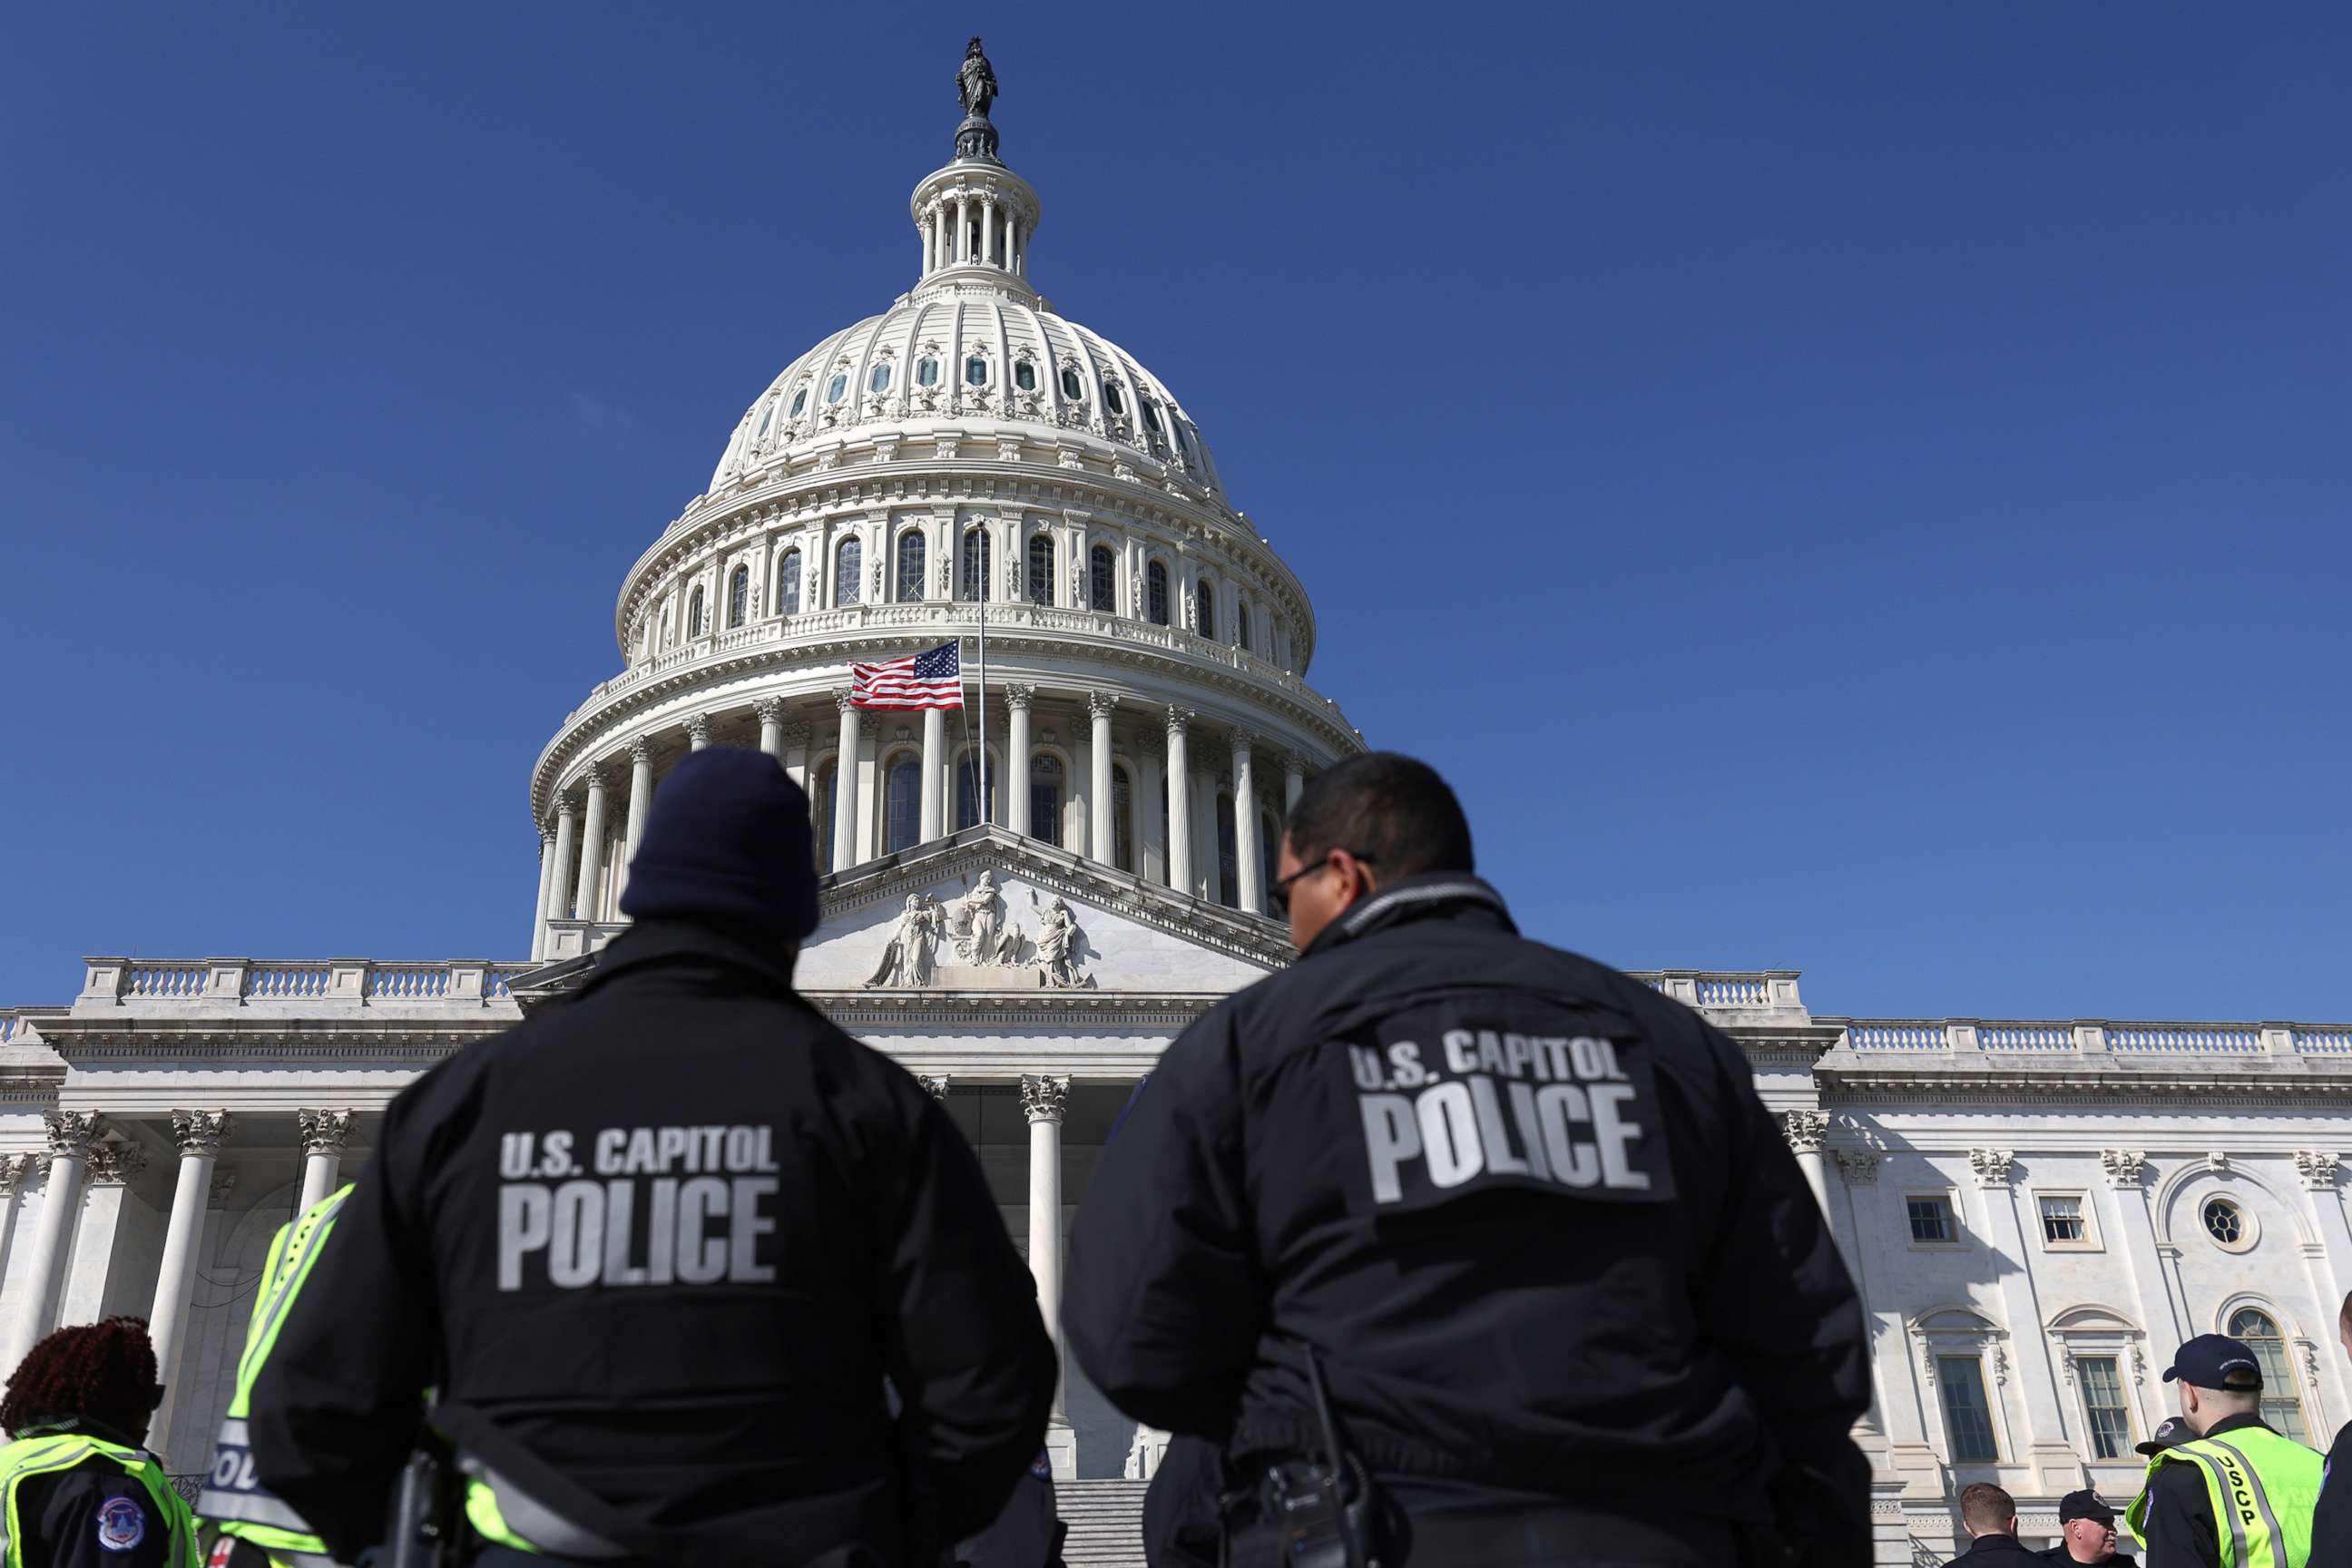 PHOTO: Capitol police officers gather on the east front plaza of the Capitol, Feb.28, 2022, in Washington, D.C., ahead of U.S. President Joe Biden's State of the Union address on Tuesday evening.